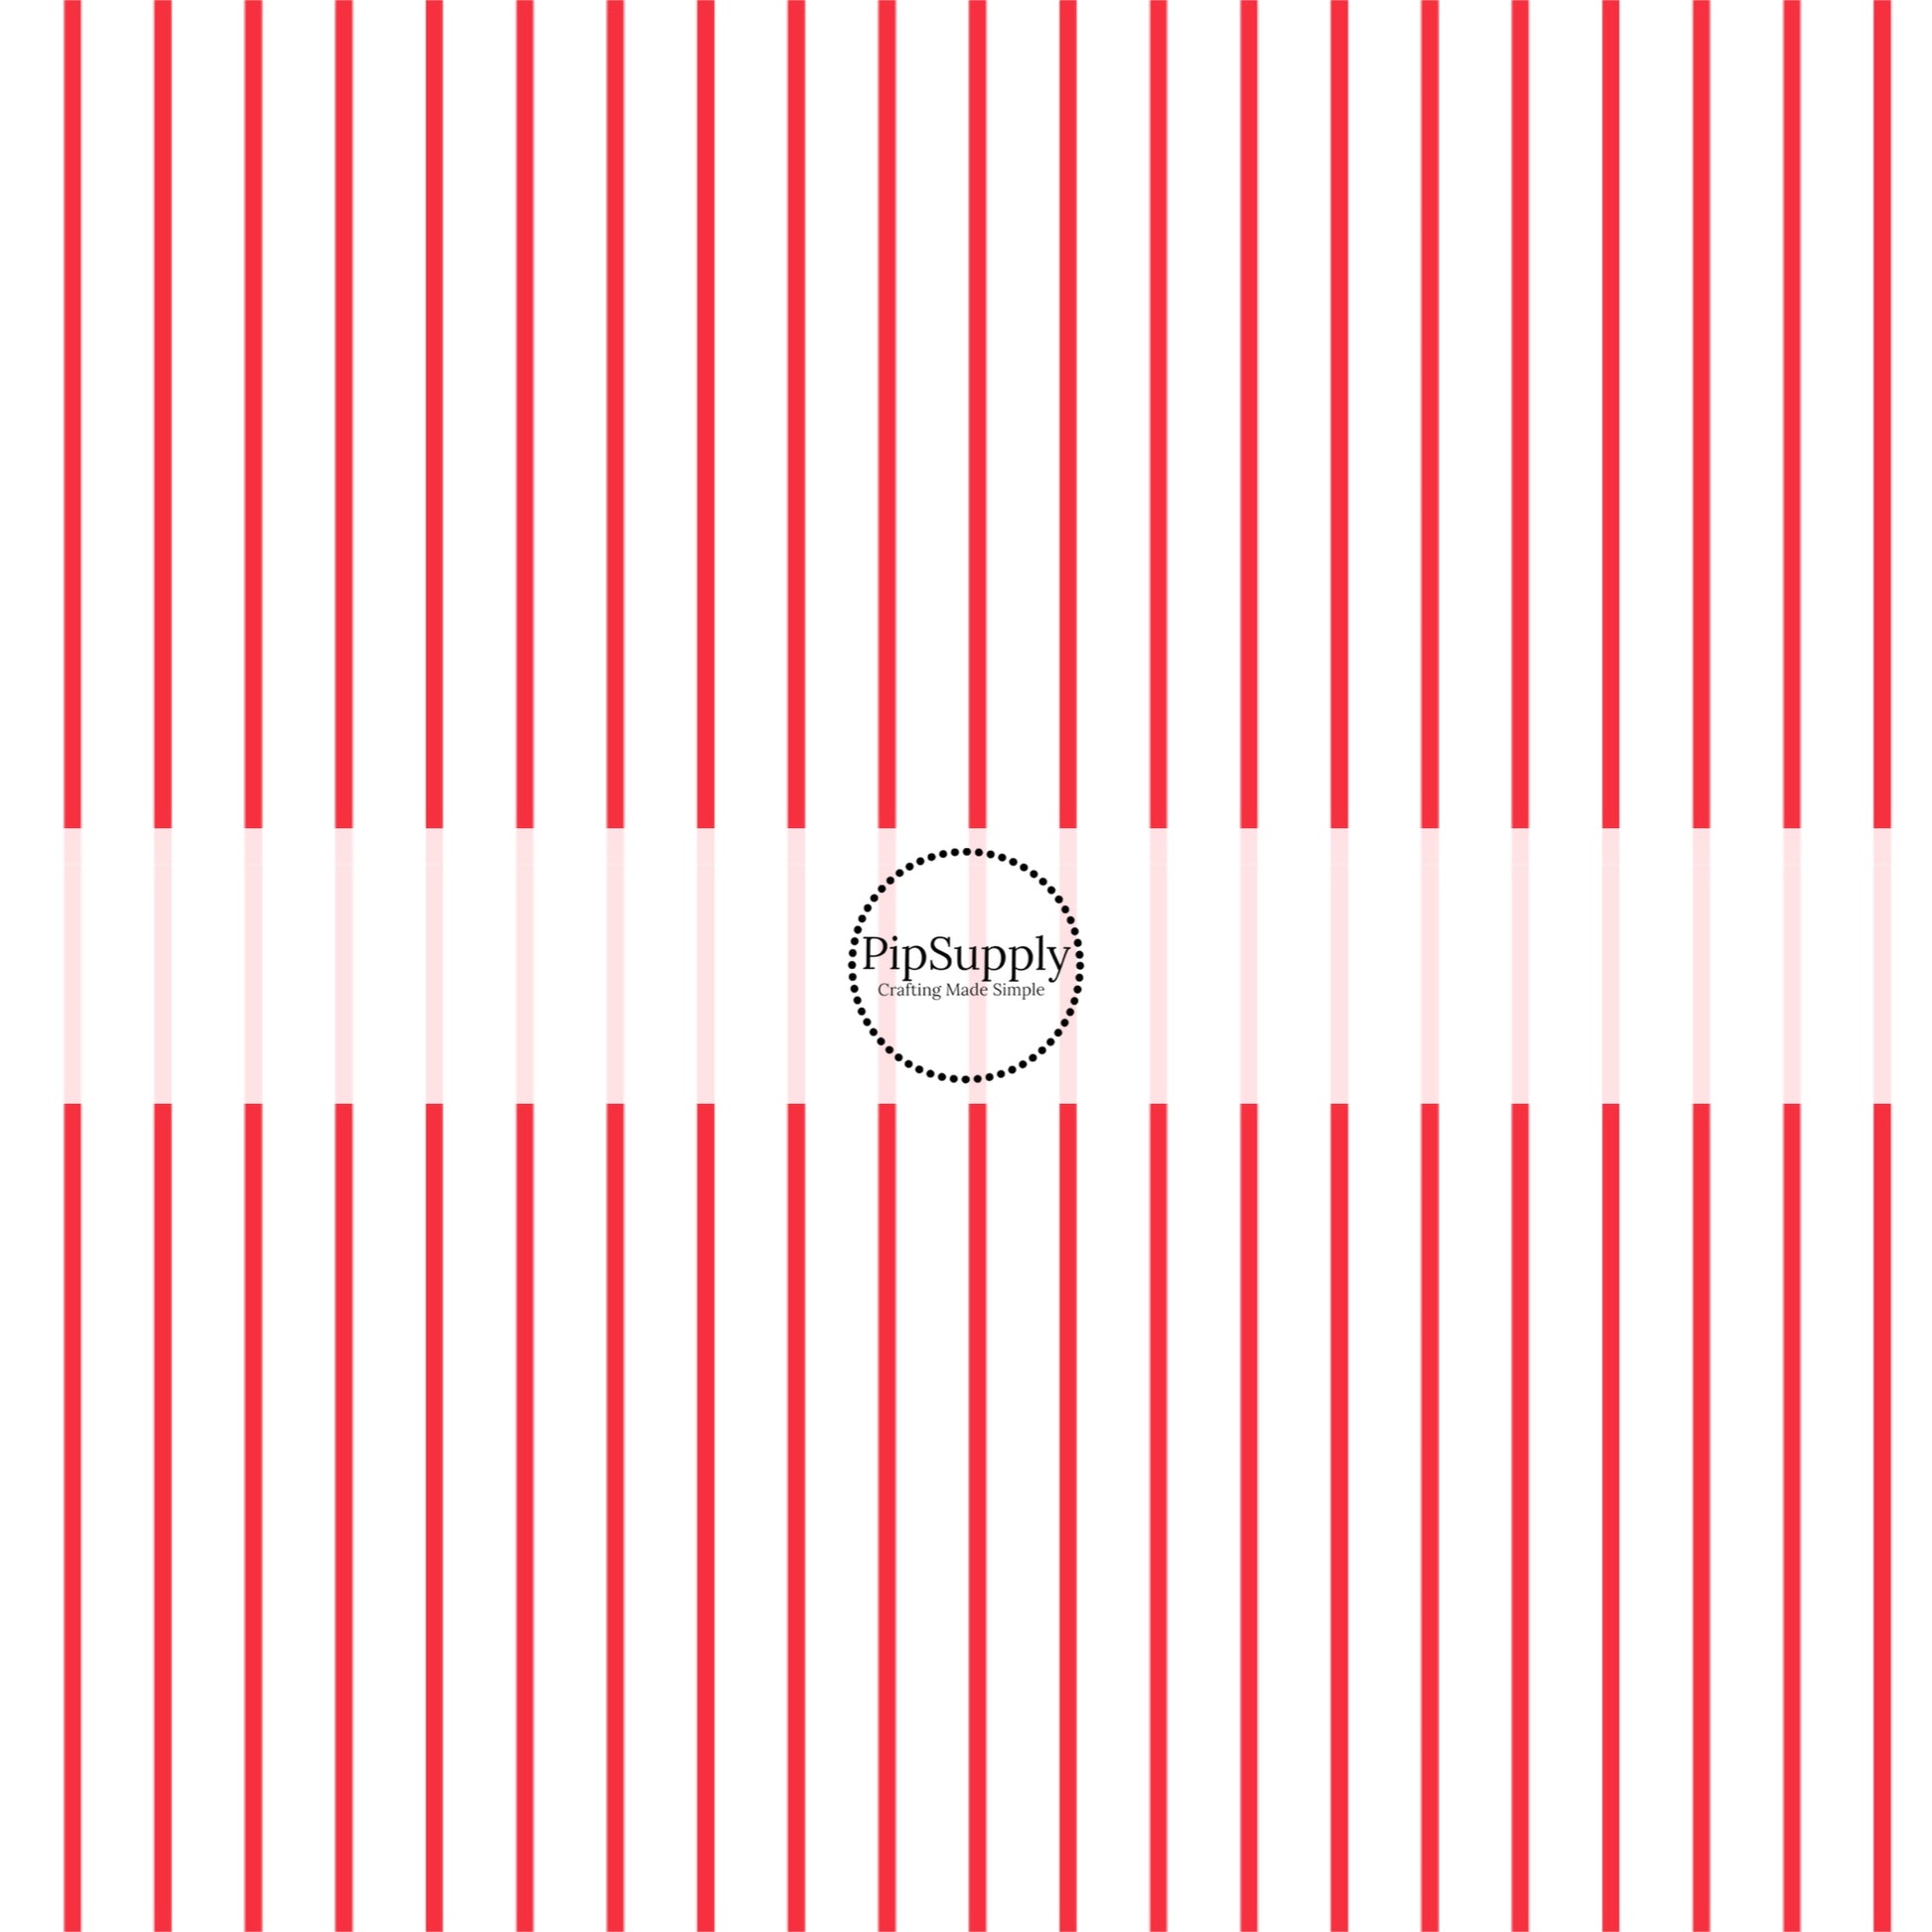 Red White Pinstripes Fabric By The Yard